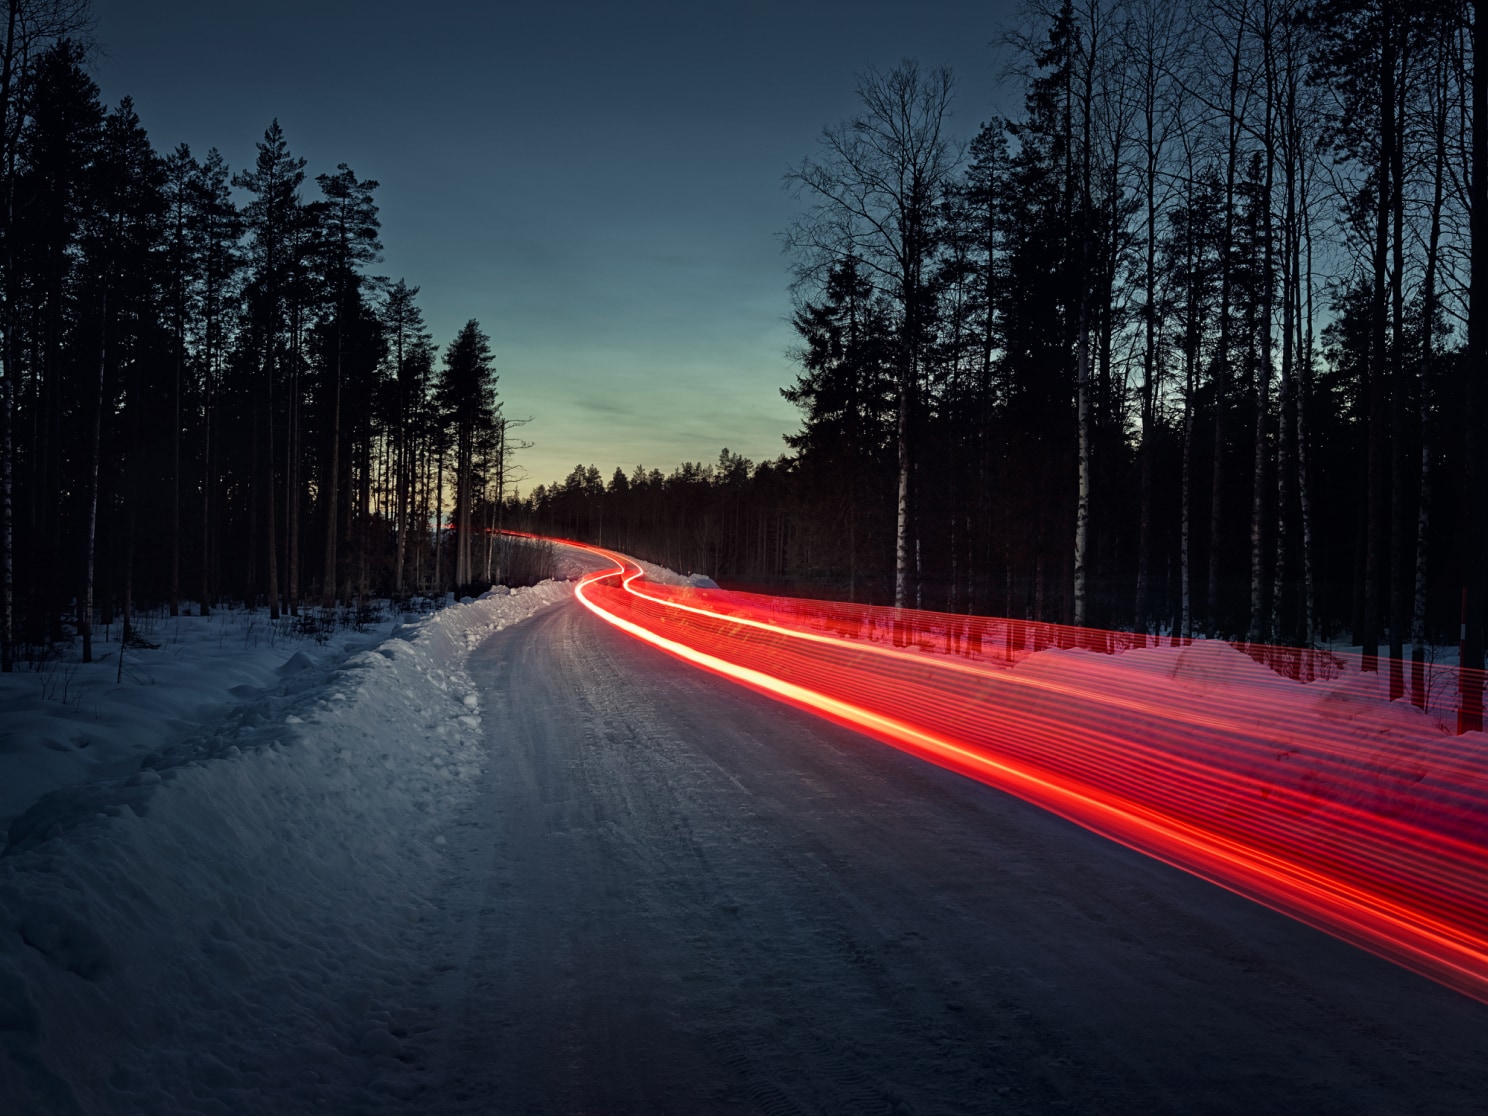 A time-delay shot of what looks like a trail of red tail lamps on an icy road.